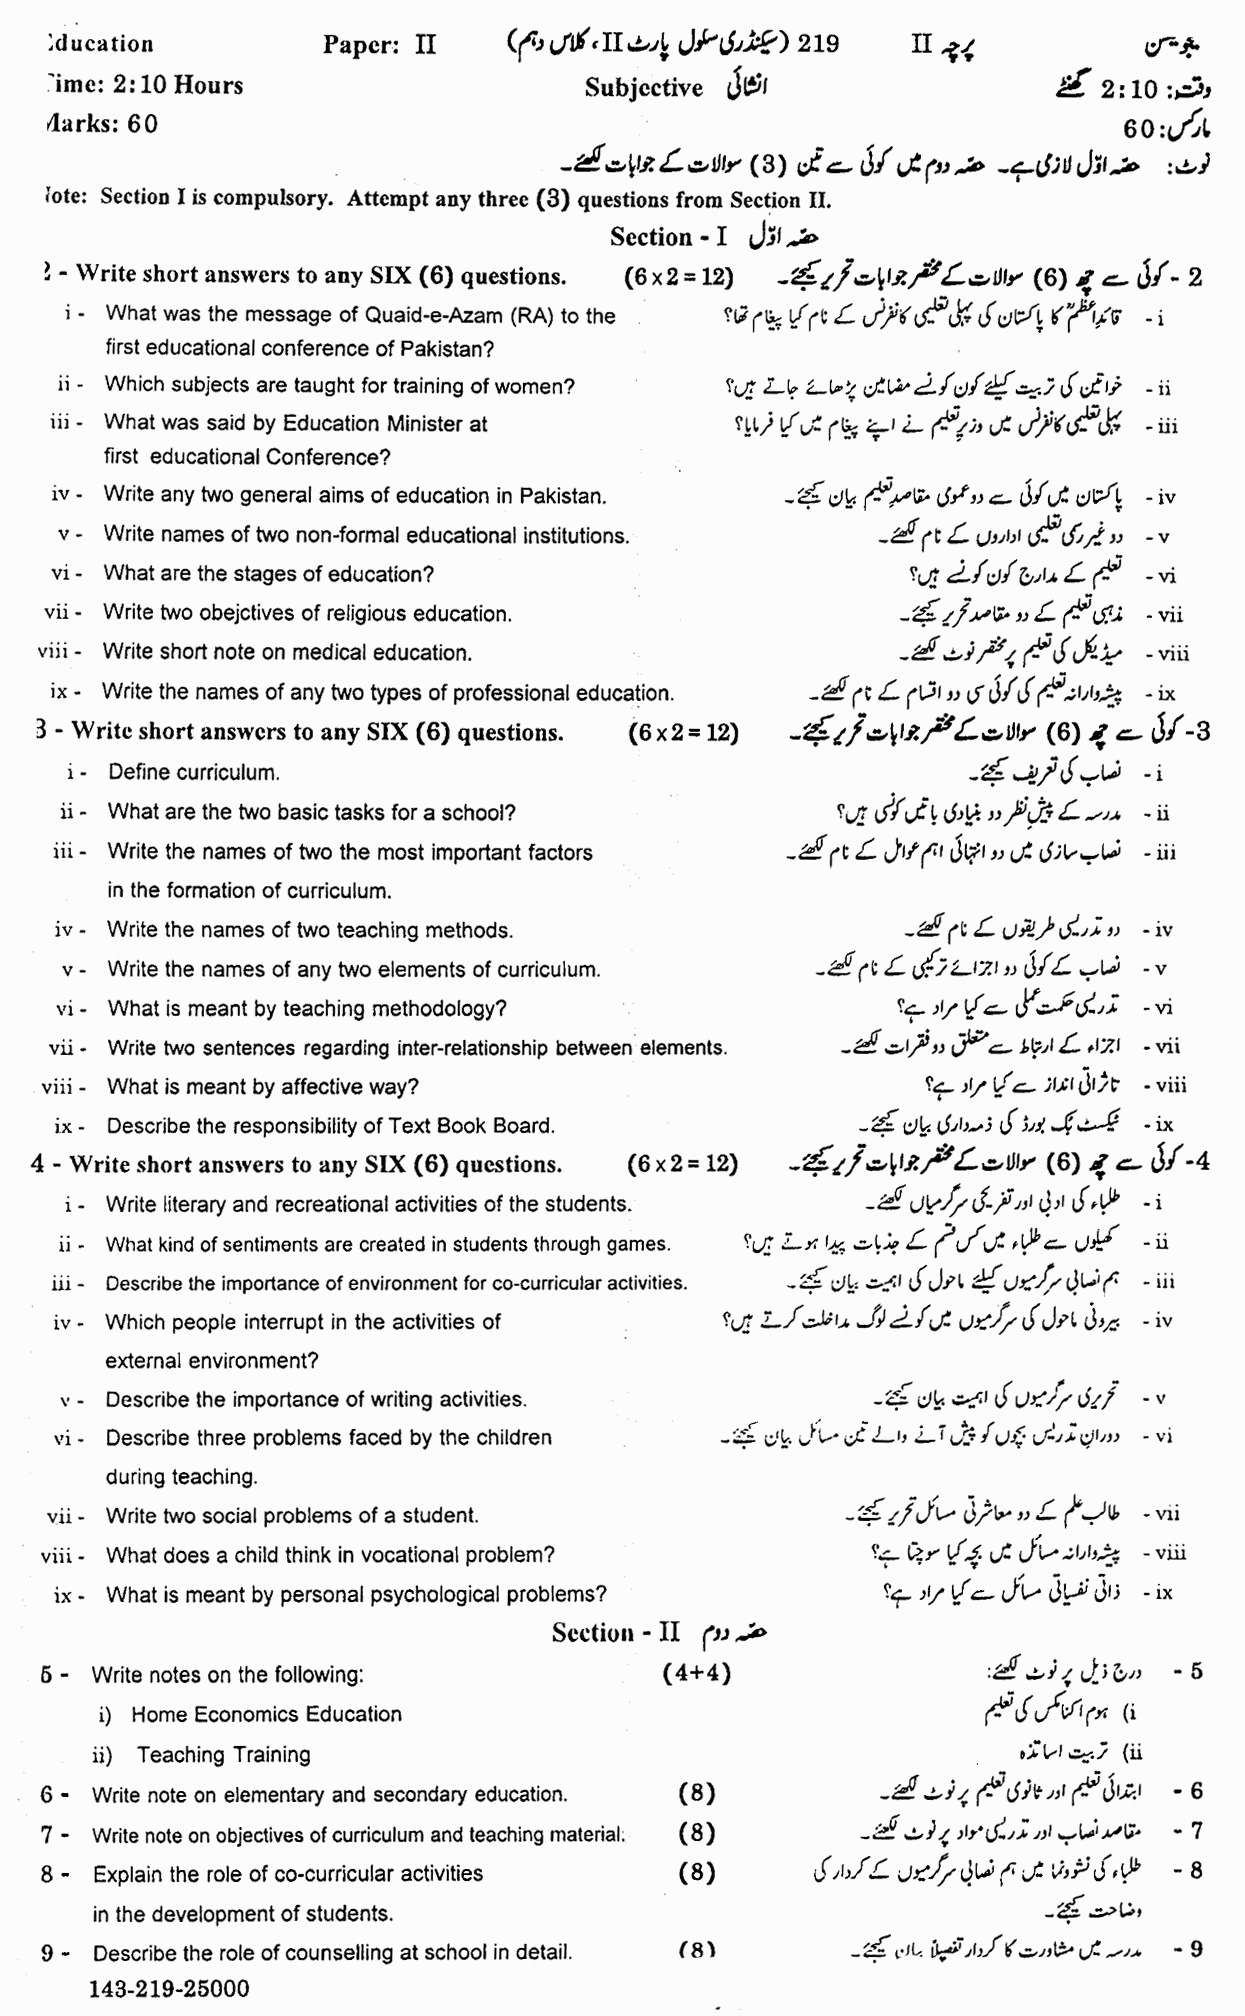 10th Class Education Paper 2019 Gujranwala Board Subjective